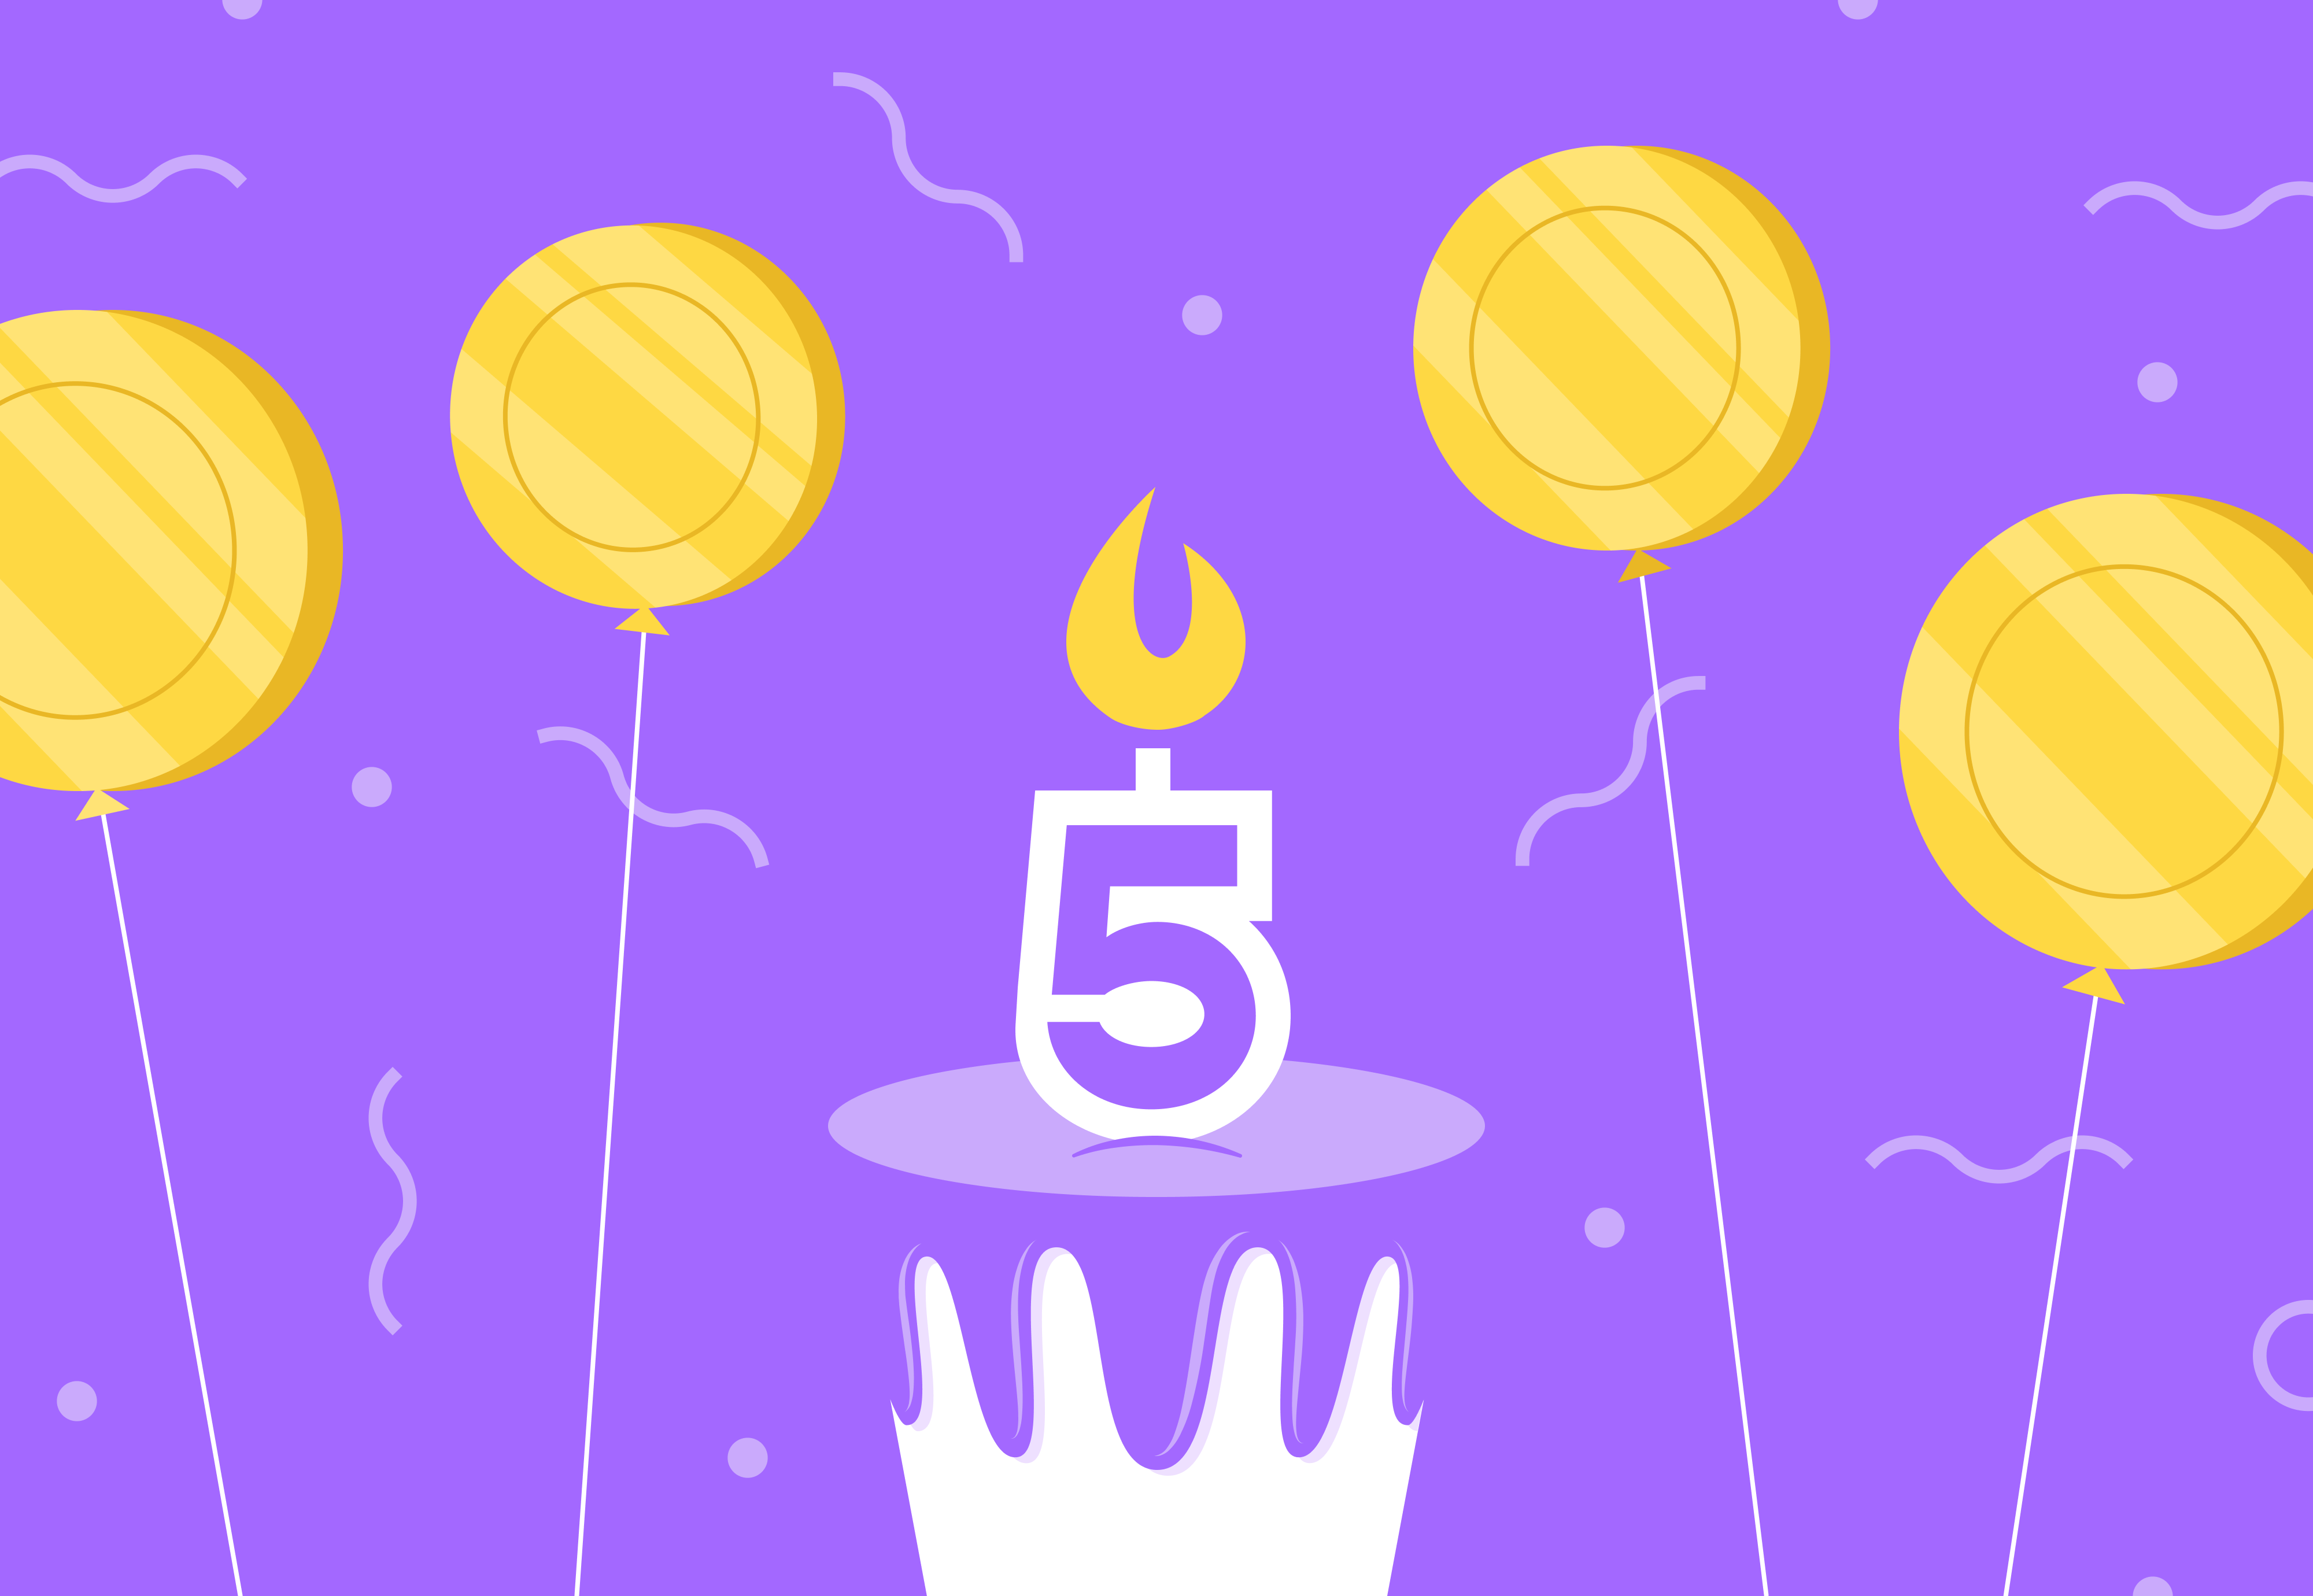 5 Years of Lolli: Celebrate With Increased Rewards at StubHub, Petco, Reebok, and more!